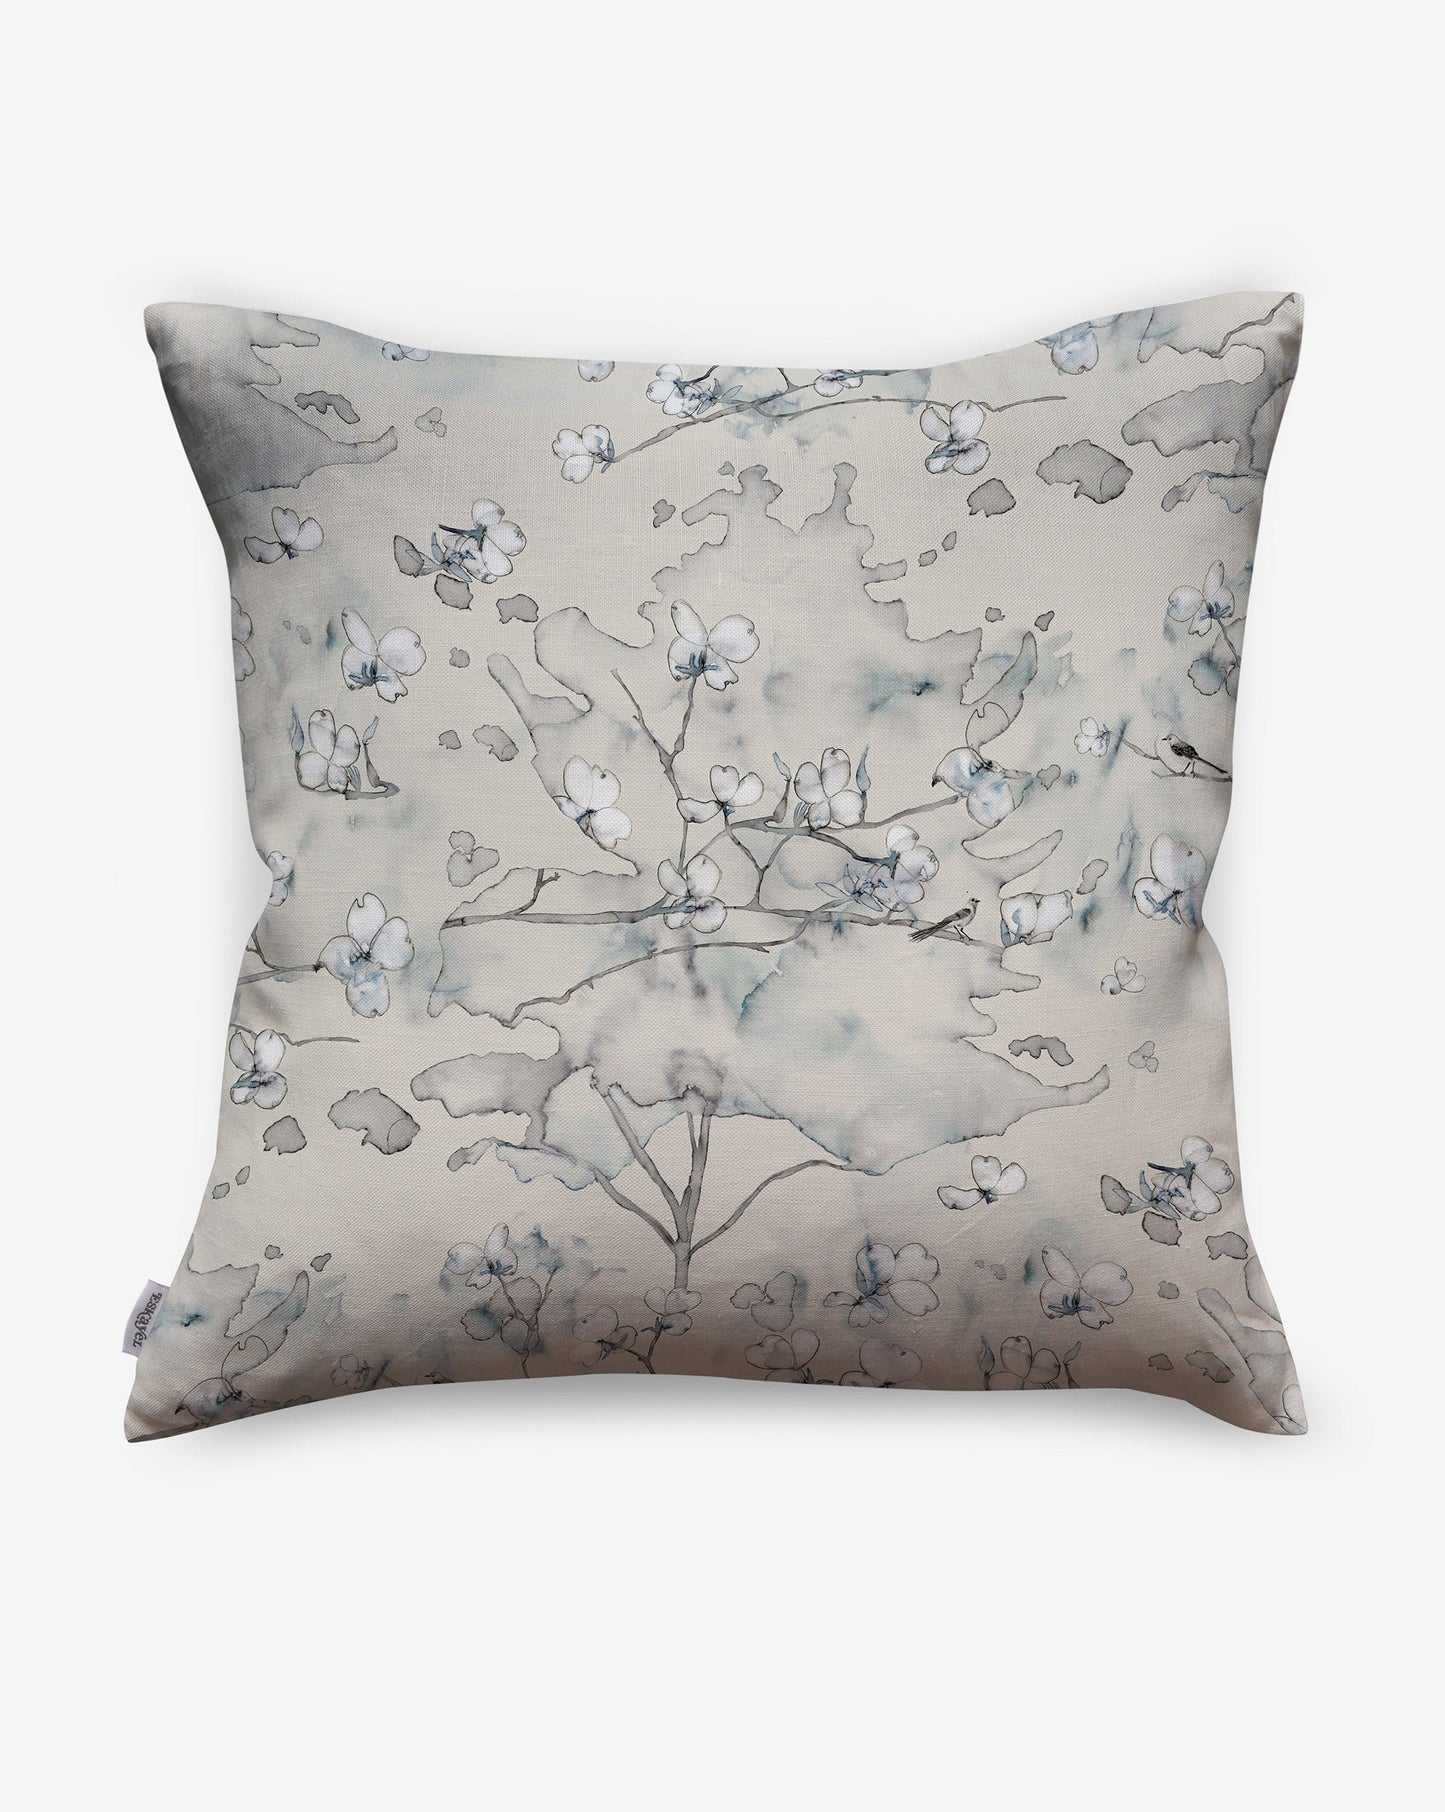 Dogwood Dreams pillows in the beige and blue Indigo Classic Grey colorway take inspiration from East Coast scenes in spring.